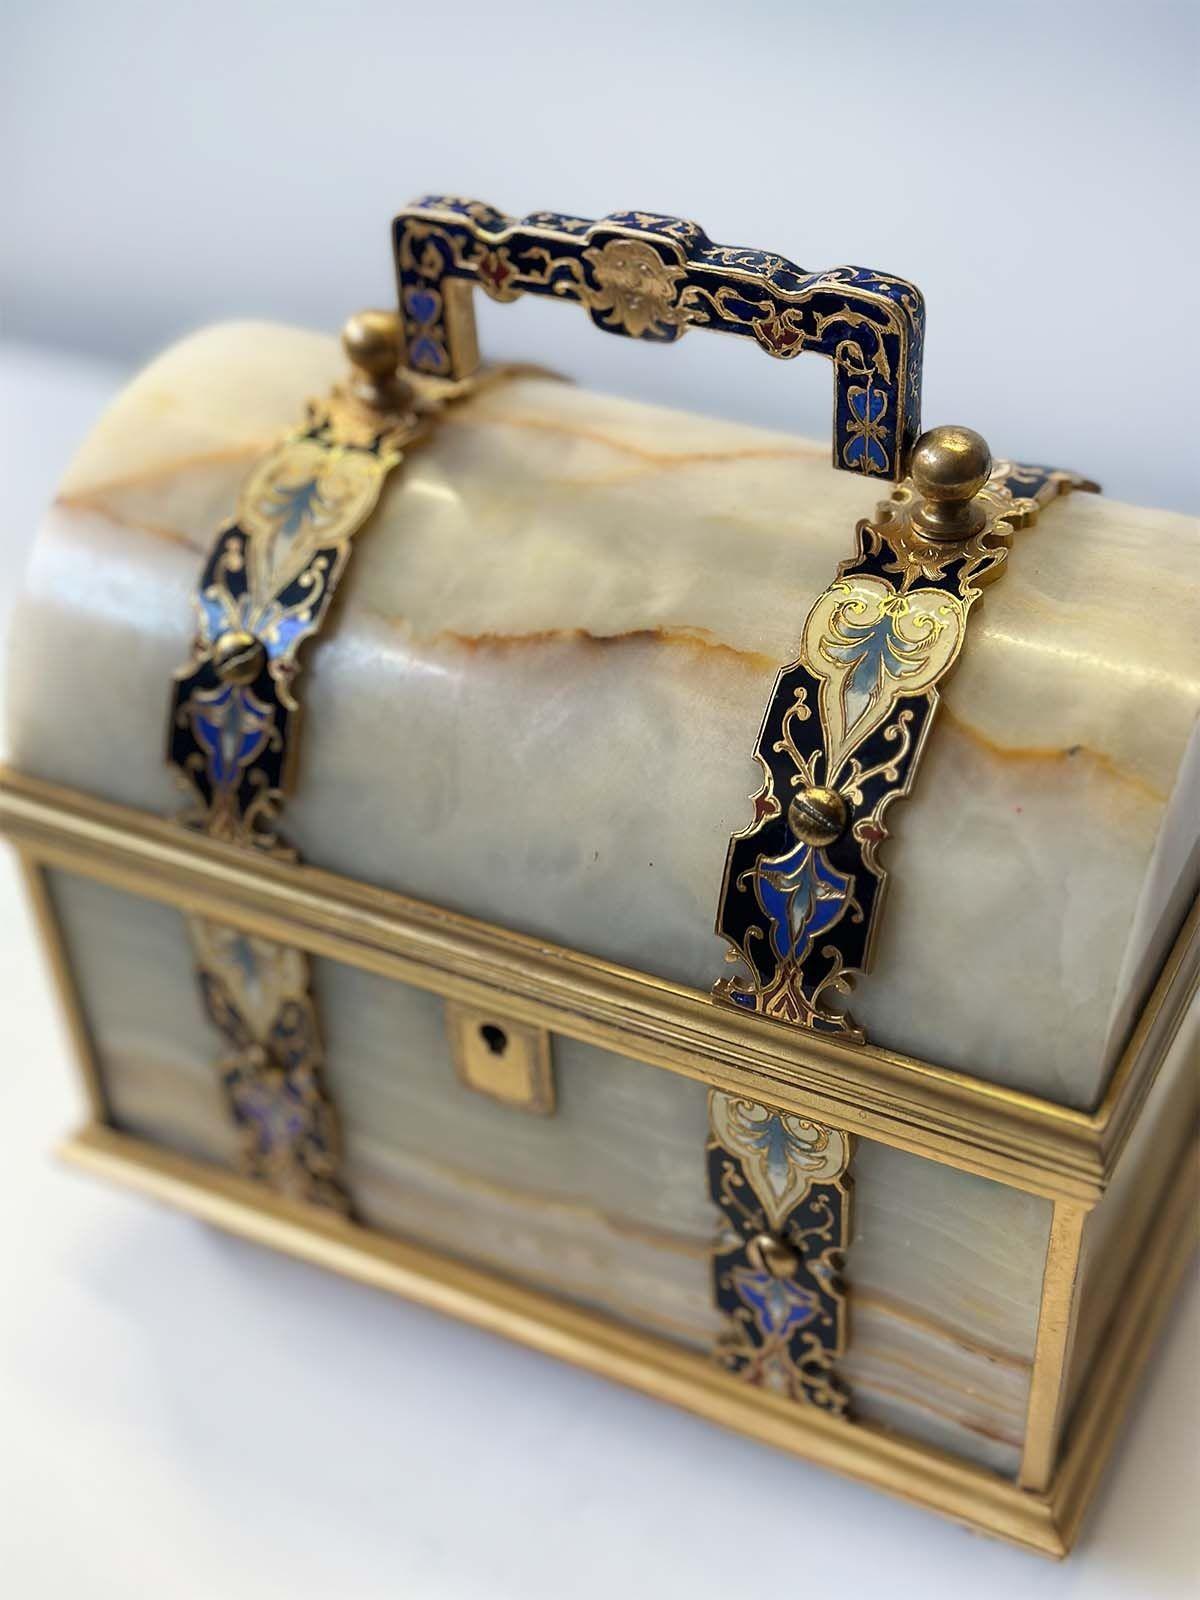 Beautiful onyx and gilt bronze champlevé enamel jewelry box in a chest design; made in France in the Late 19th Century, having a soft red velvet interior and impeccable hand-painted detailing.
Dimensions:
8